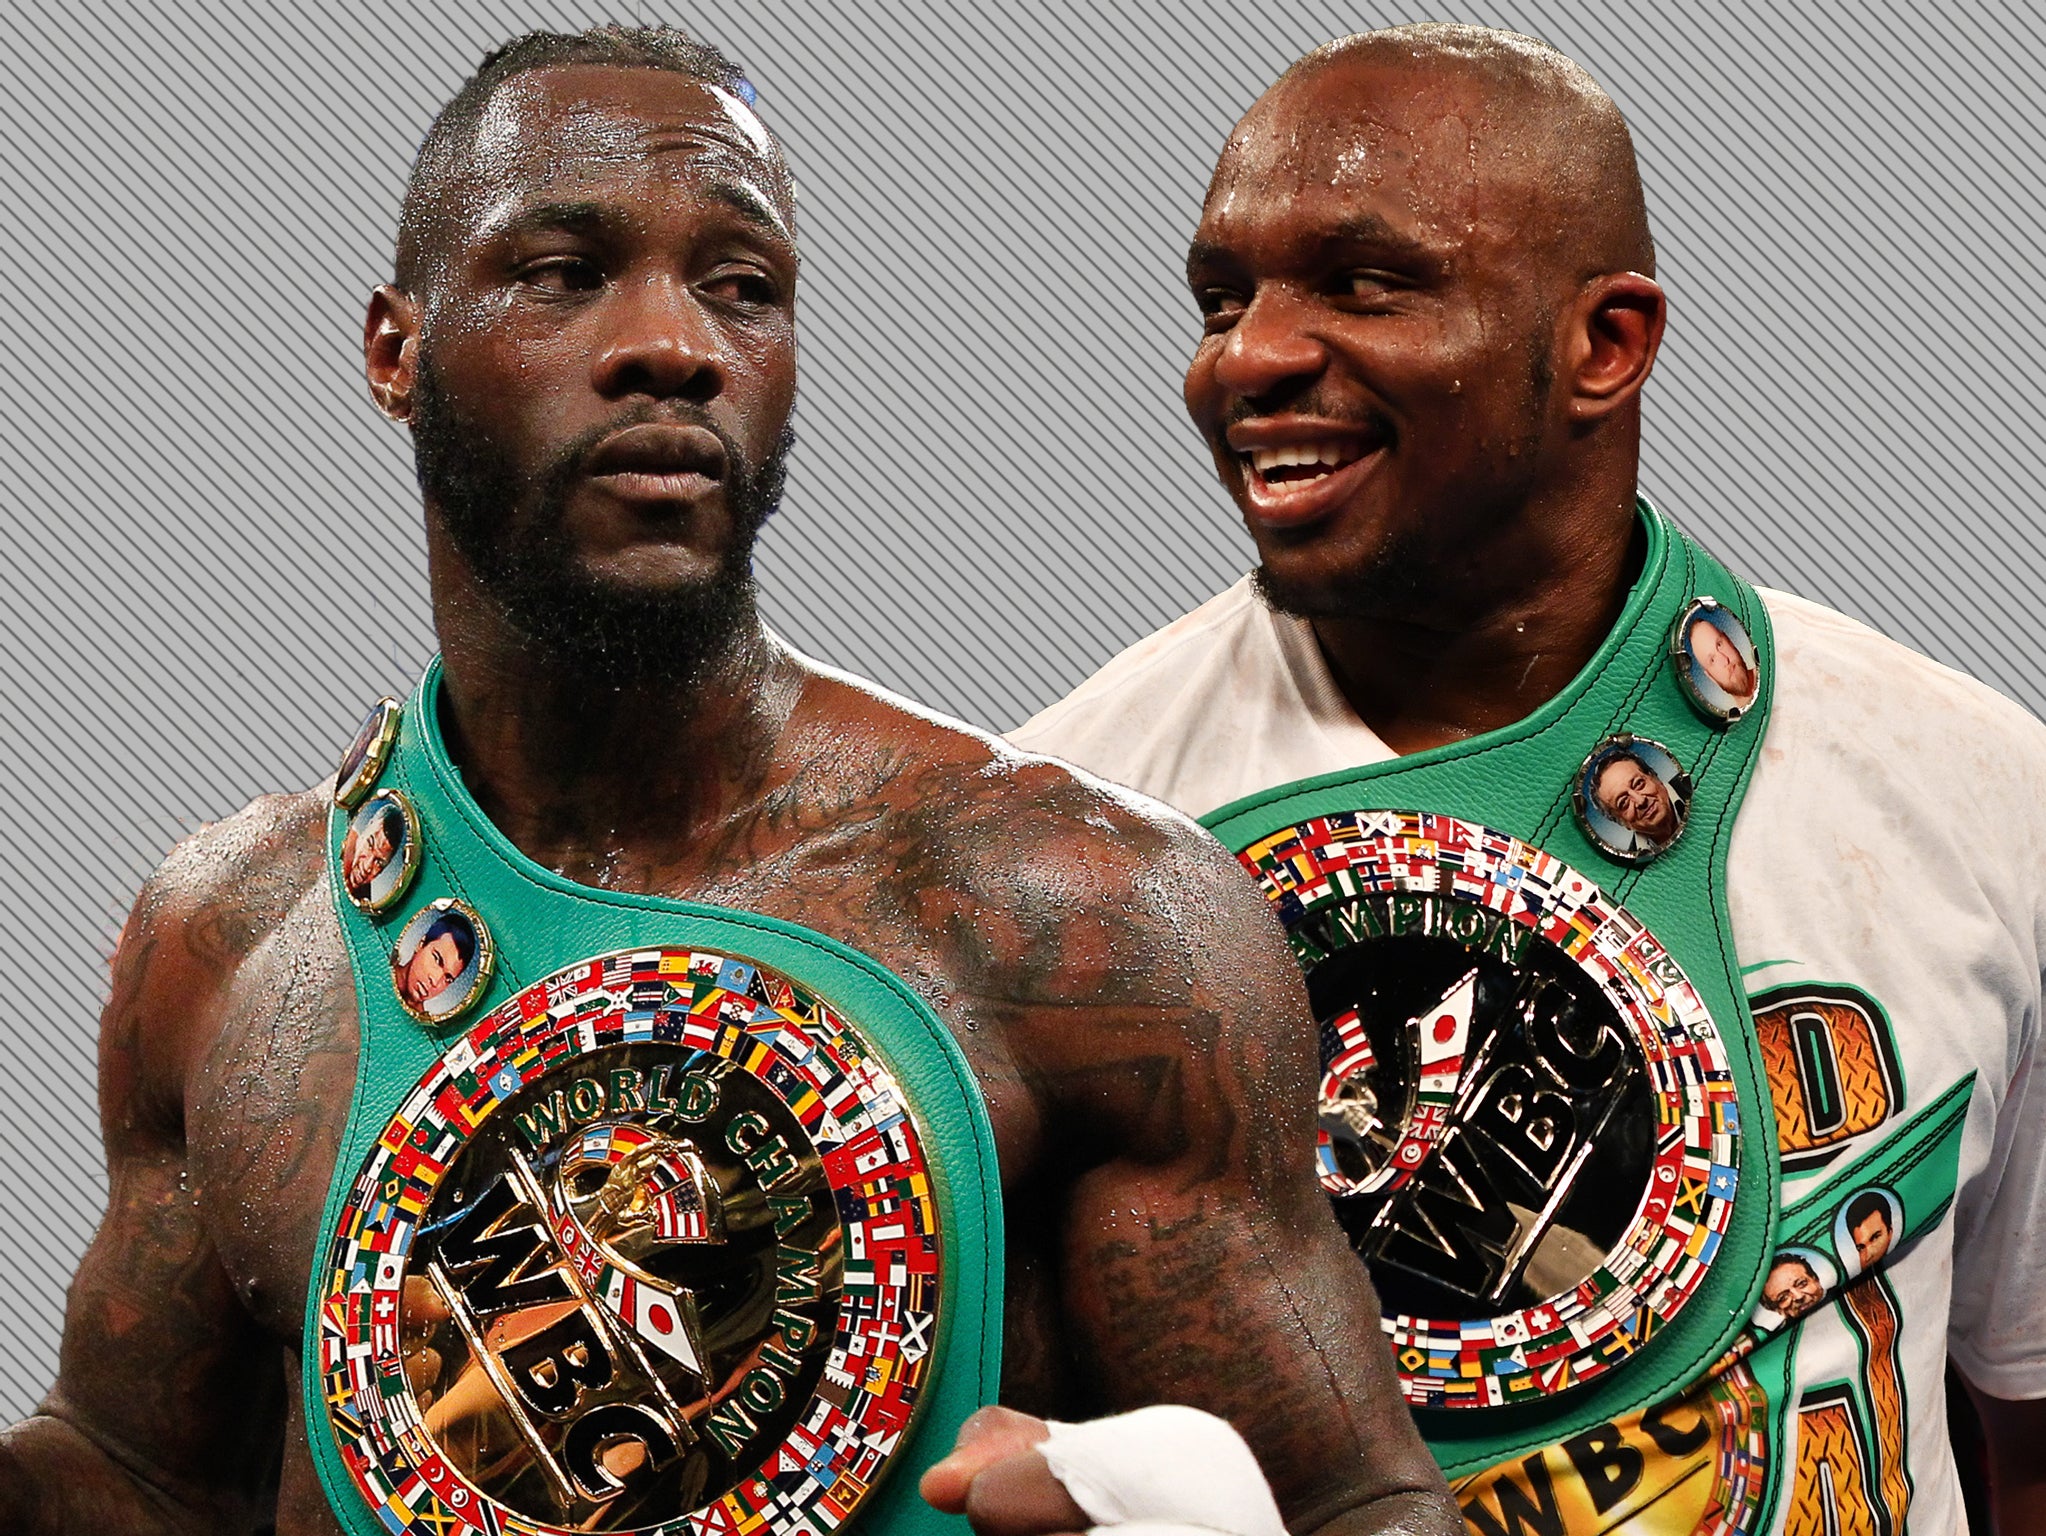 A fight between the pair would be great news for the heavyweight division